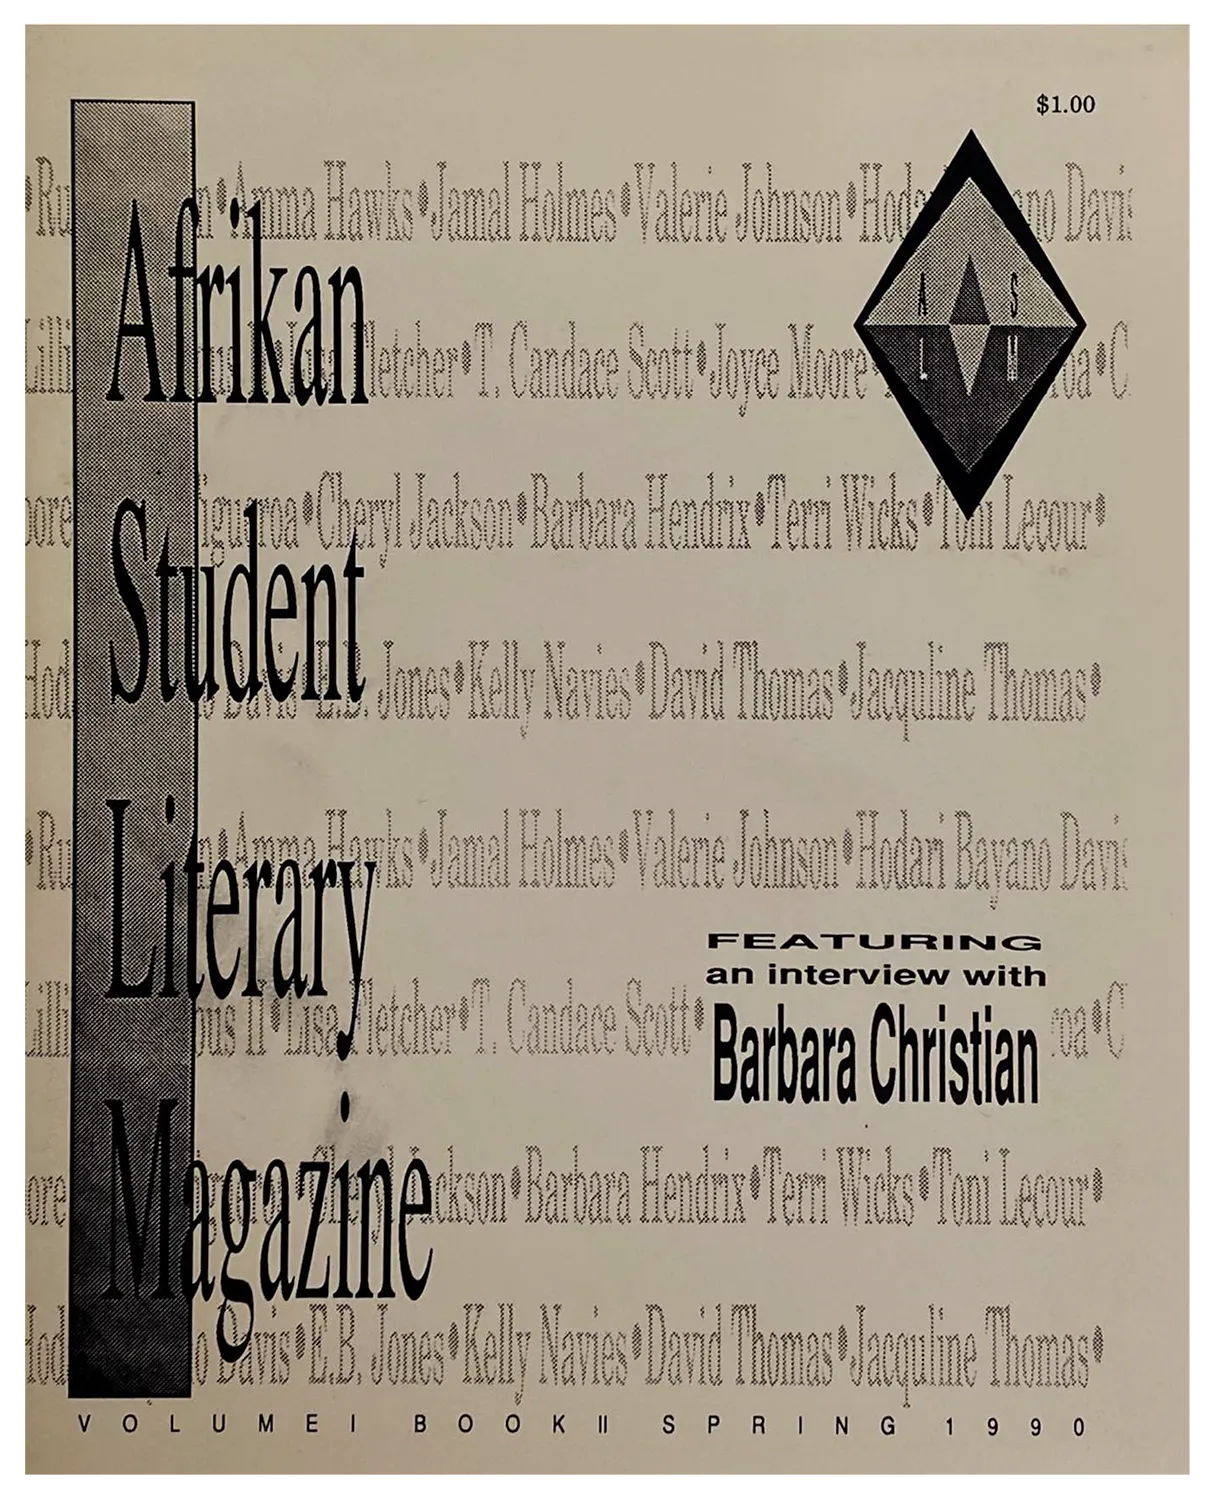 Black, gray, and white magazine cover with the Afrikan Student Literary Magazine logo on the top right corner.